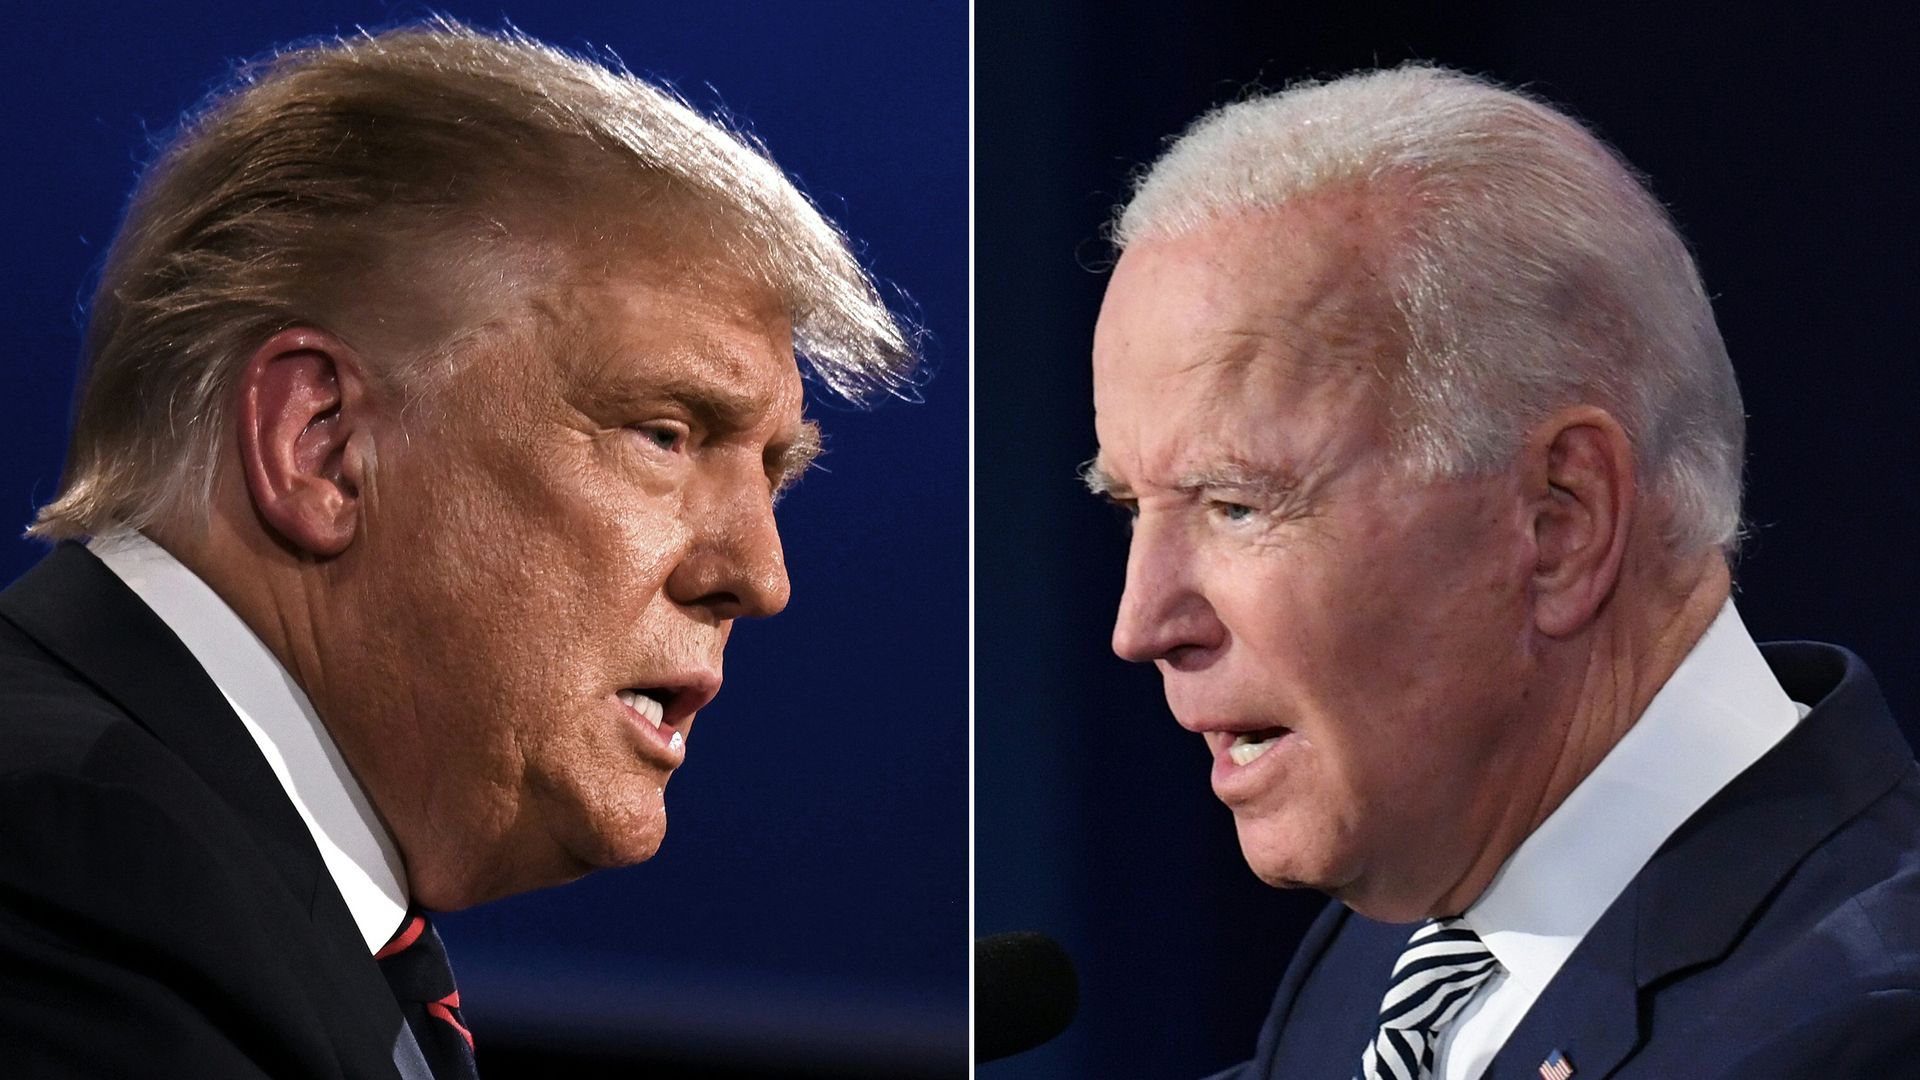 President Donald Trumpand Democratic Presidential candidate Joe Biden  during the first presidential debate  in Cleveland, Ohio on September 29